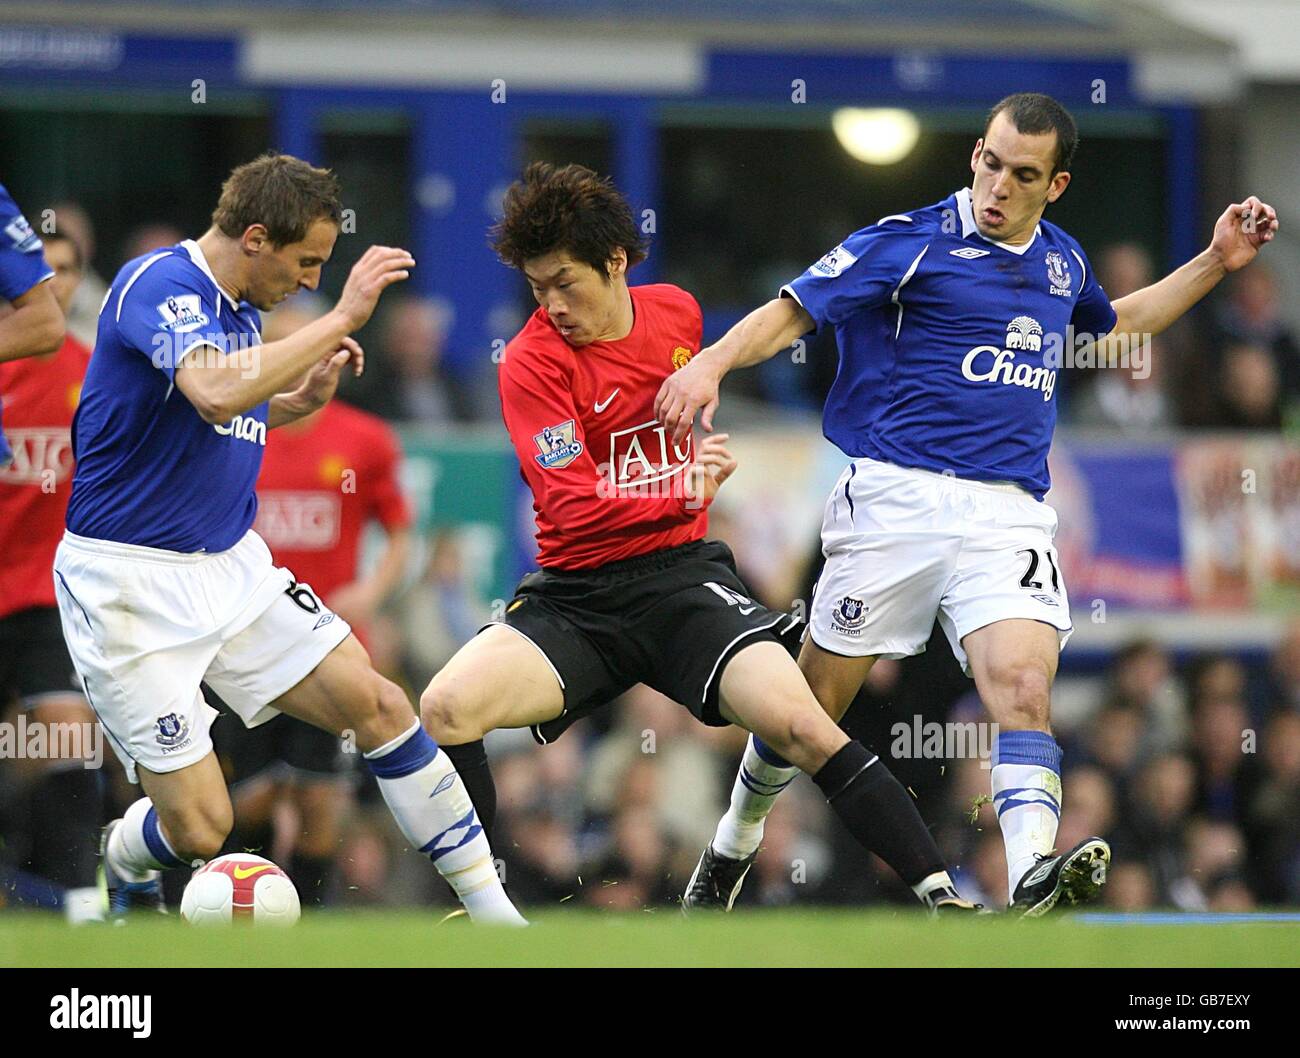 Soccer - Barclays Premier League - Everton v Manchester United - Goodison Park. Everton's Phil Jagielka (l) and Leon Osman (r) challenge Manchester United's Ji-Sung Park for the ball Stock Photo